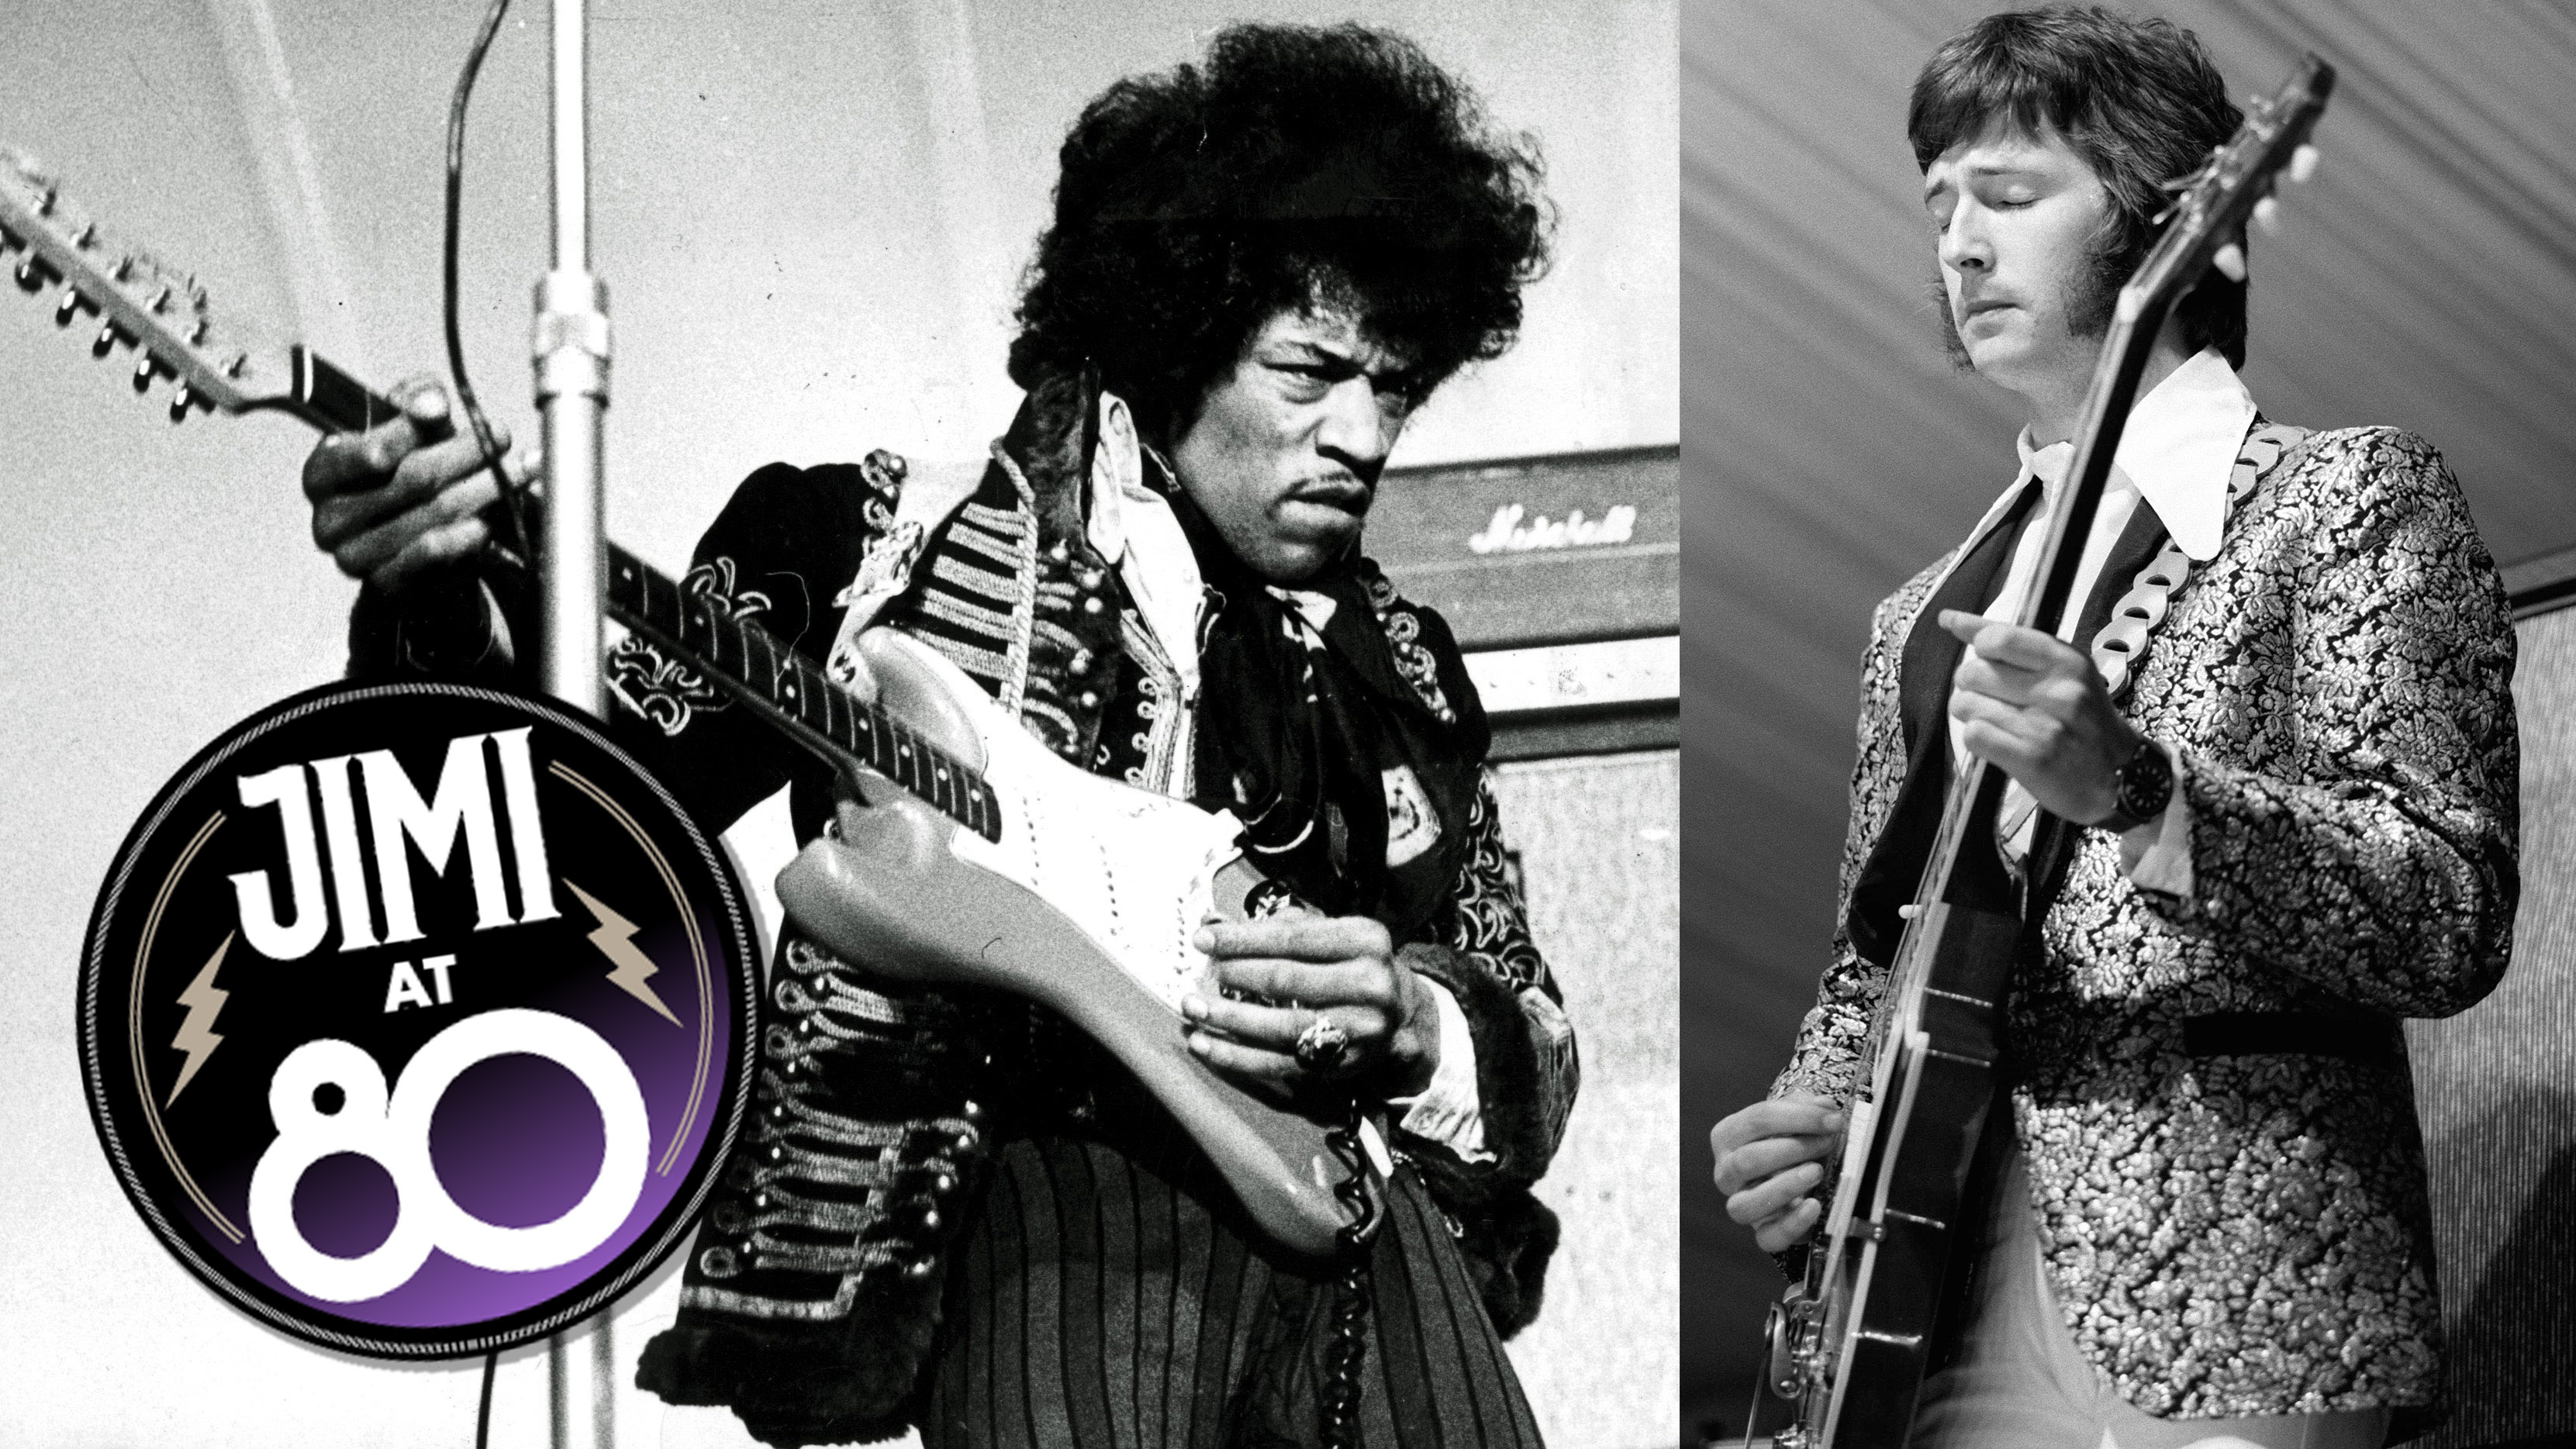 Jimi Hendrix - This Day In Music